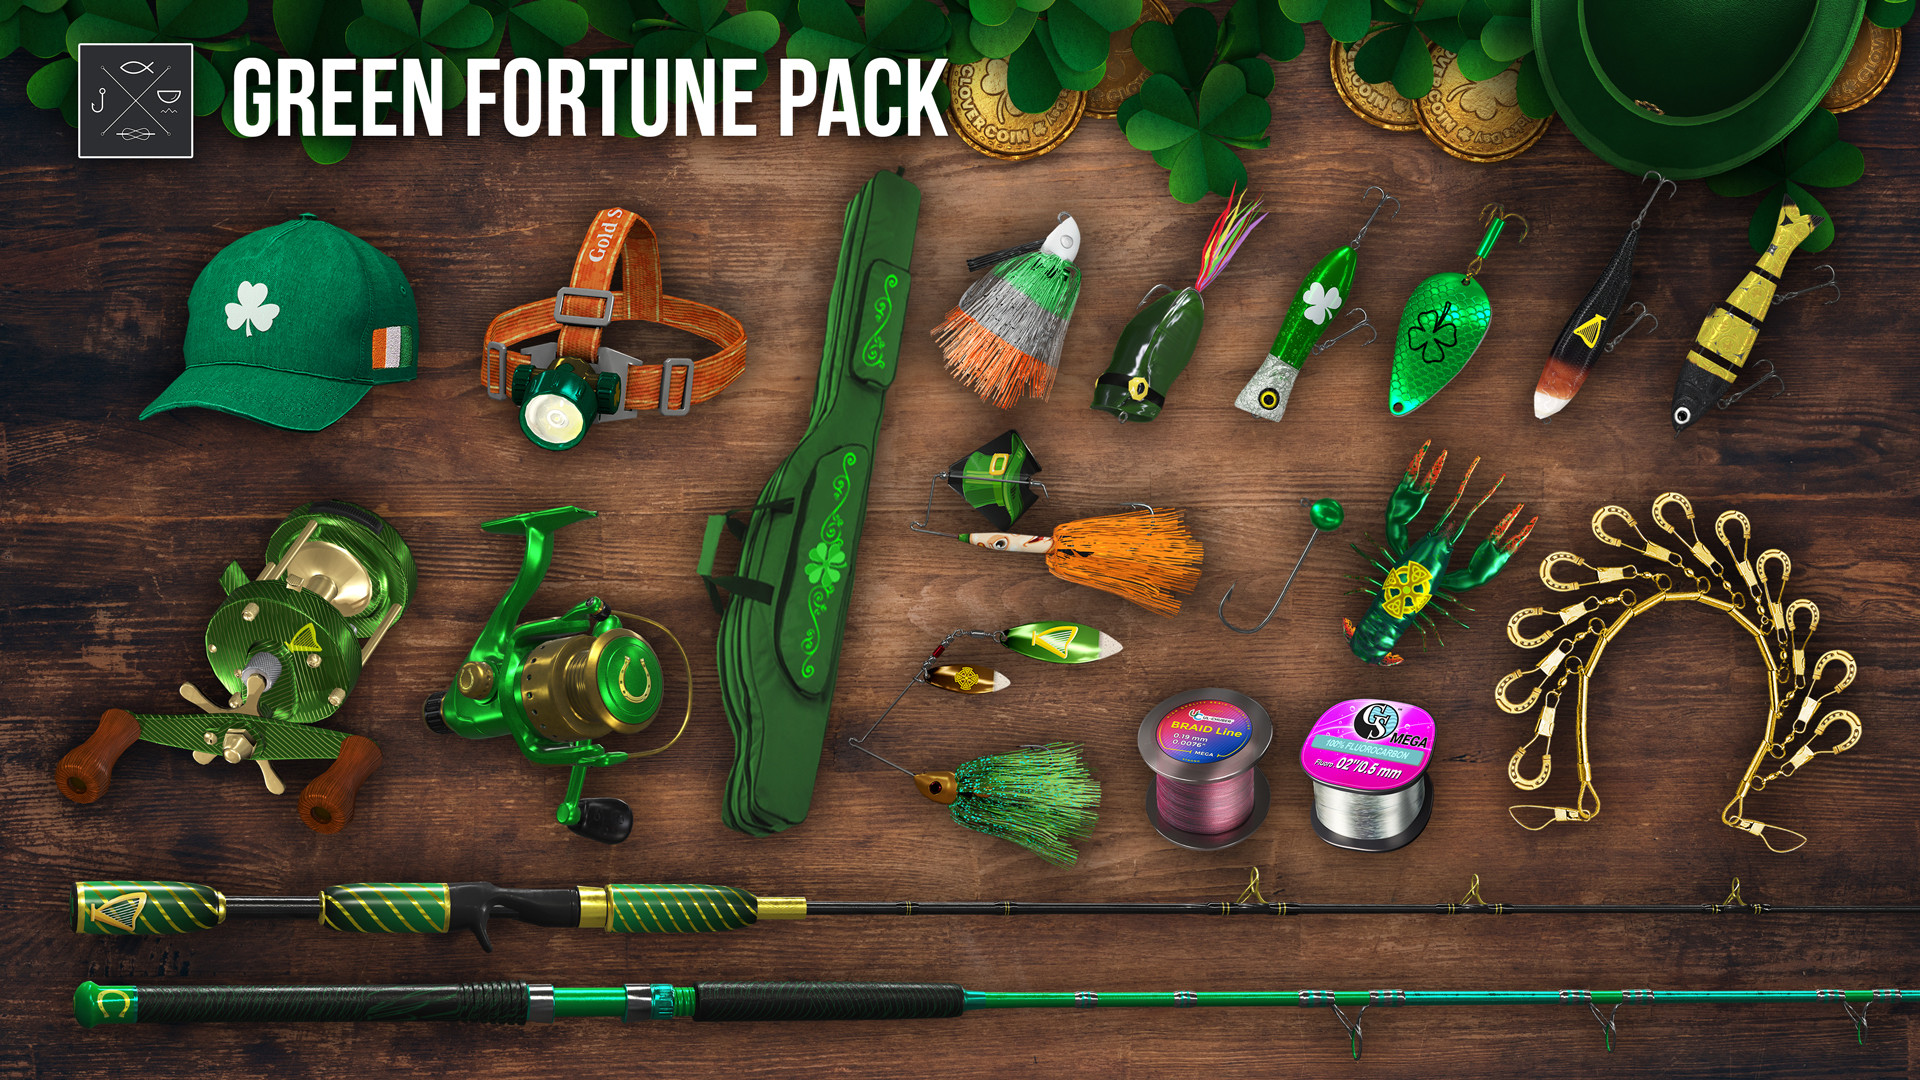 Fishing Planet: Green Fortune Pack Featured Screenshot #1